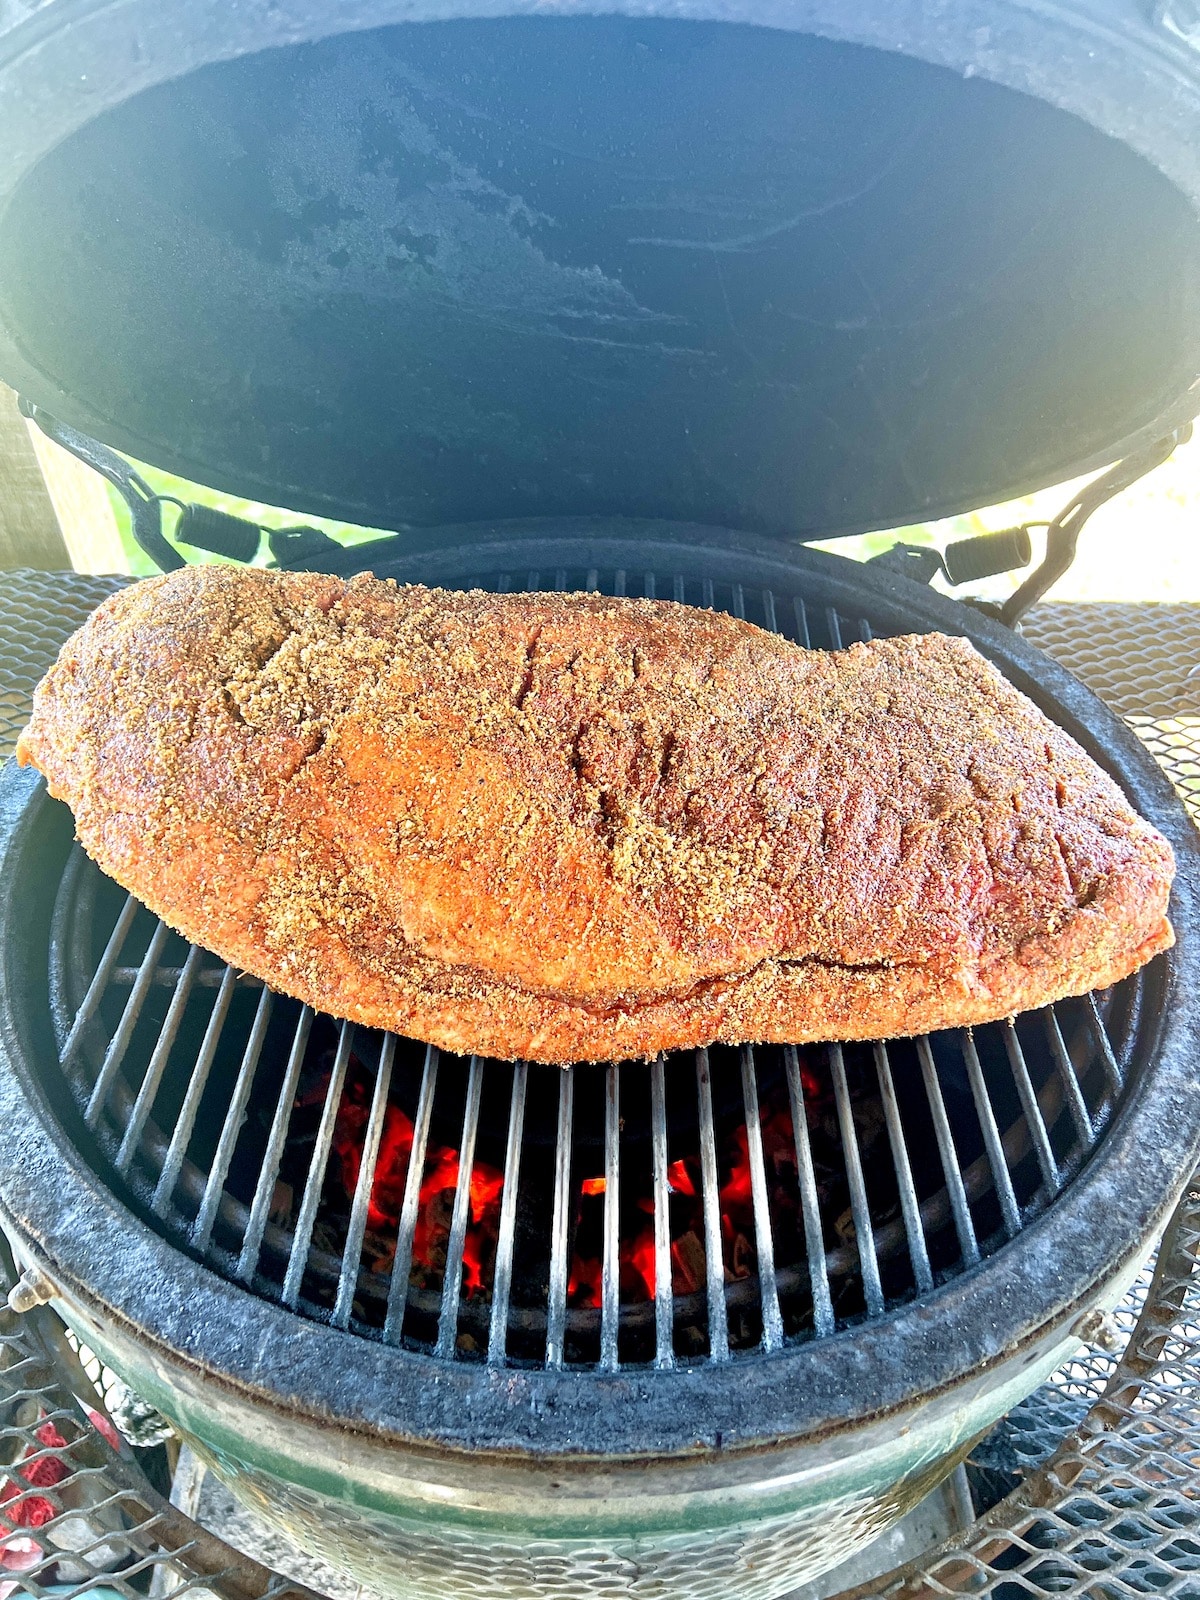 Whole beef brisket on a grill.